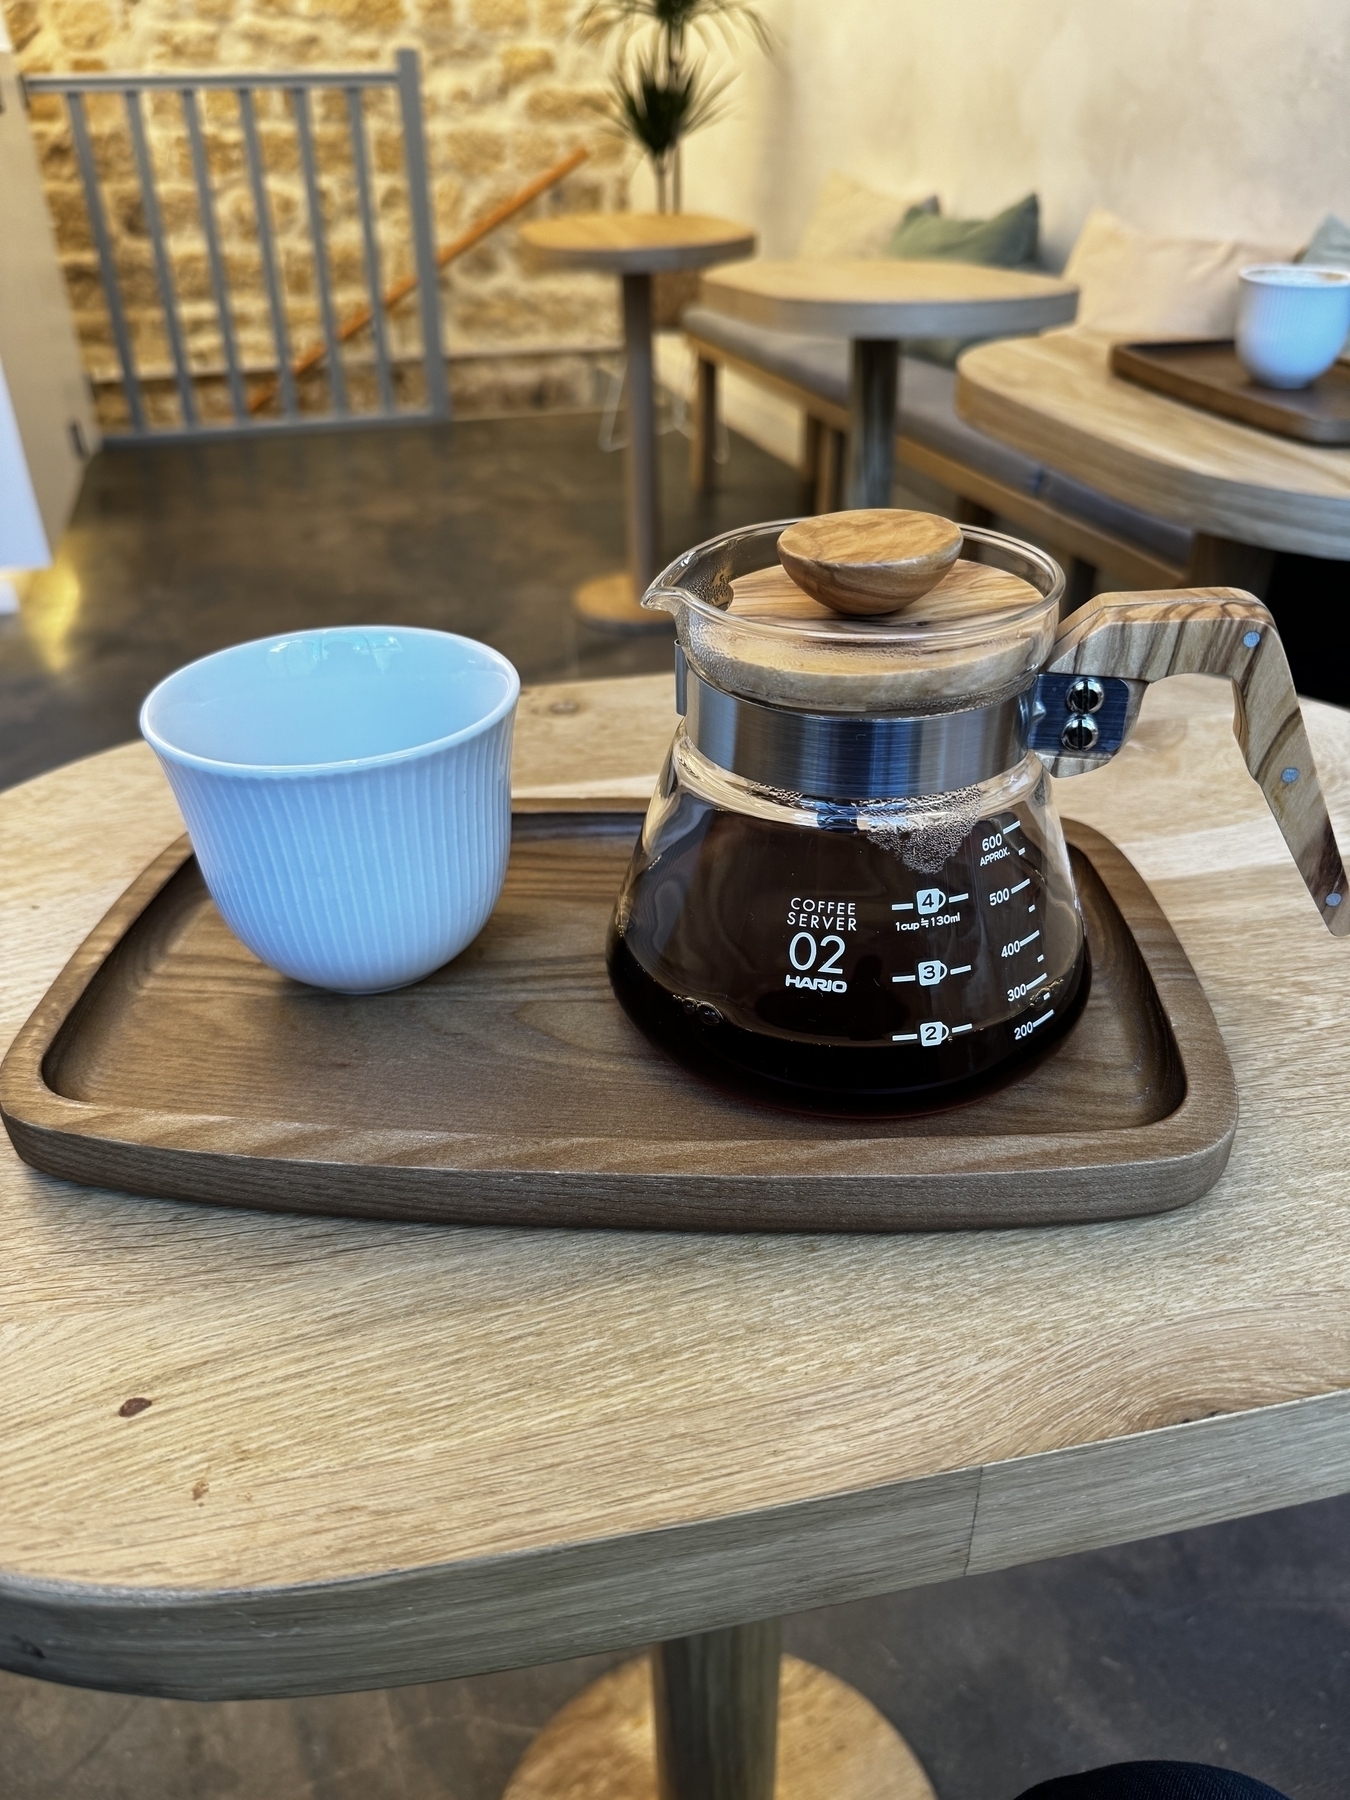 Hario coffee server on a wood tray with one cup of coffee.